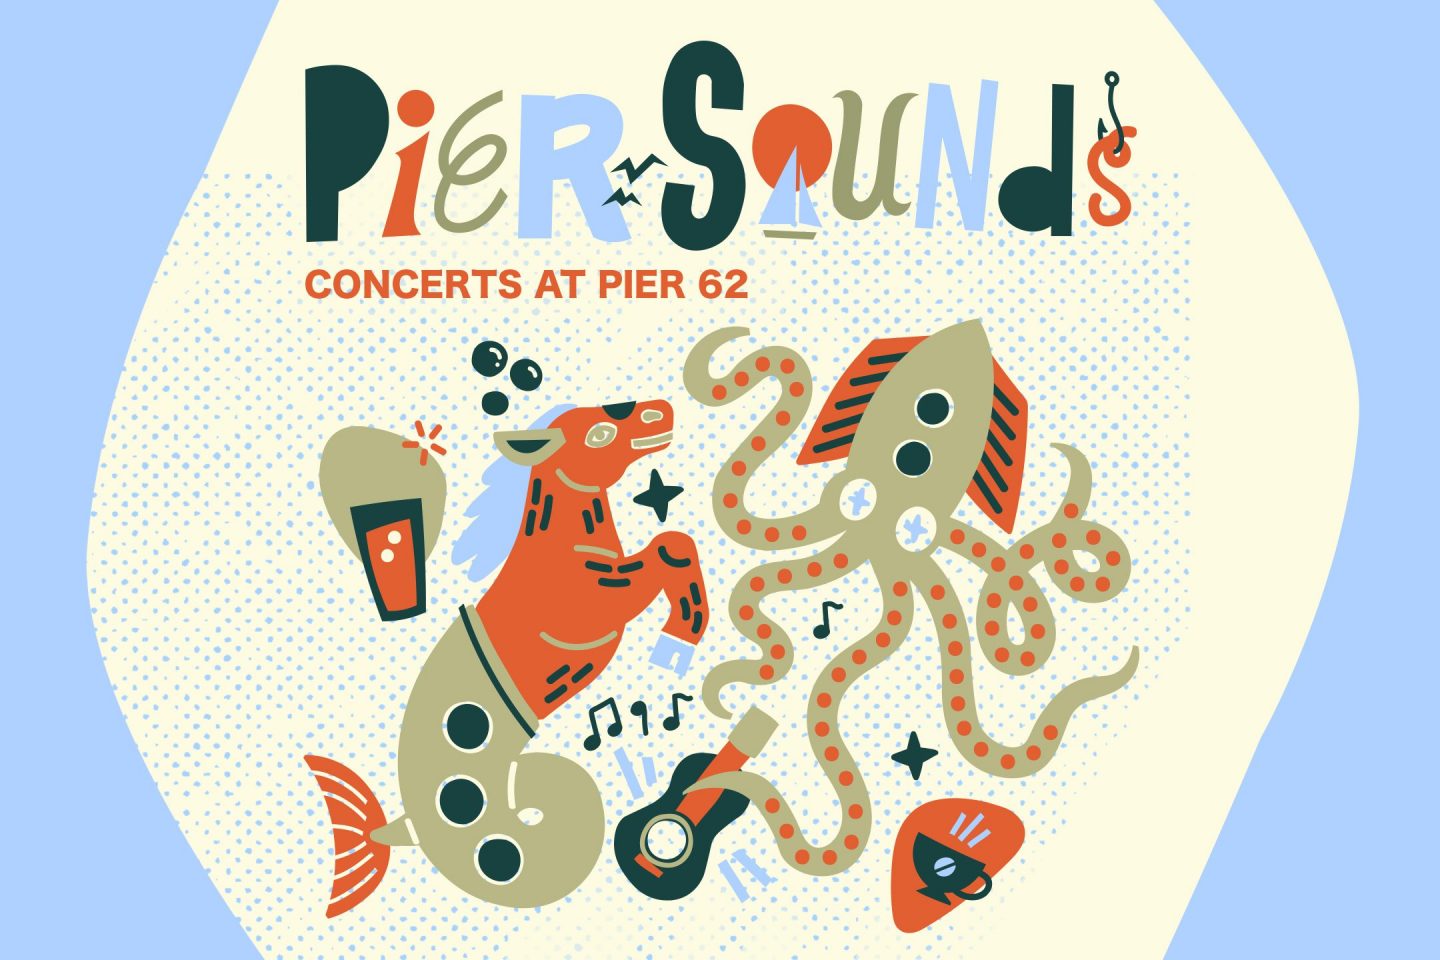 Pier Sounds: concerts at Pier 62. This colorful illustration shoes a fanciful seahorse and octopus surrounded by a guitar, a bubbly drink, and cup of coffee. The octopus is playing the guitar! All are surrounded by a light periwinkle framing. Art illustration source by Stevie Shao, design arrangement by Effective Design.